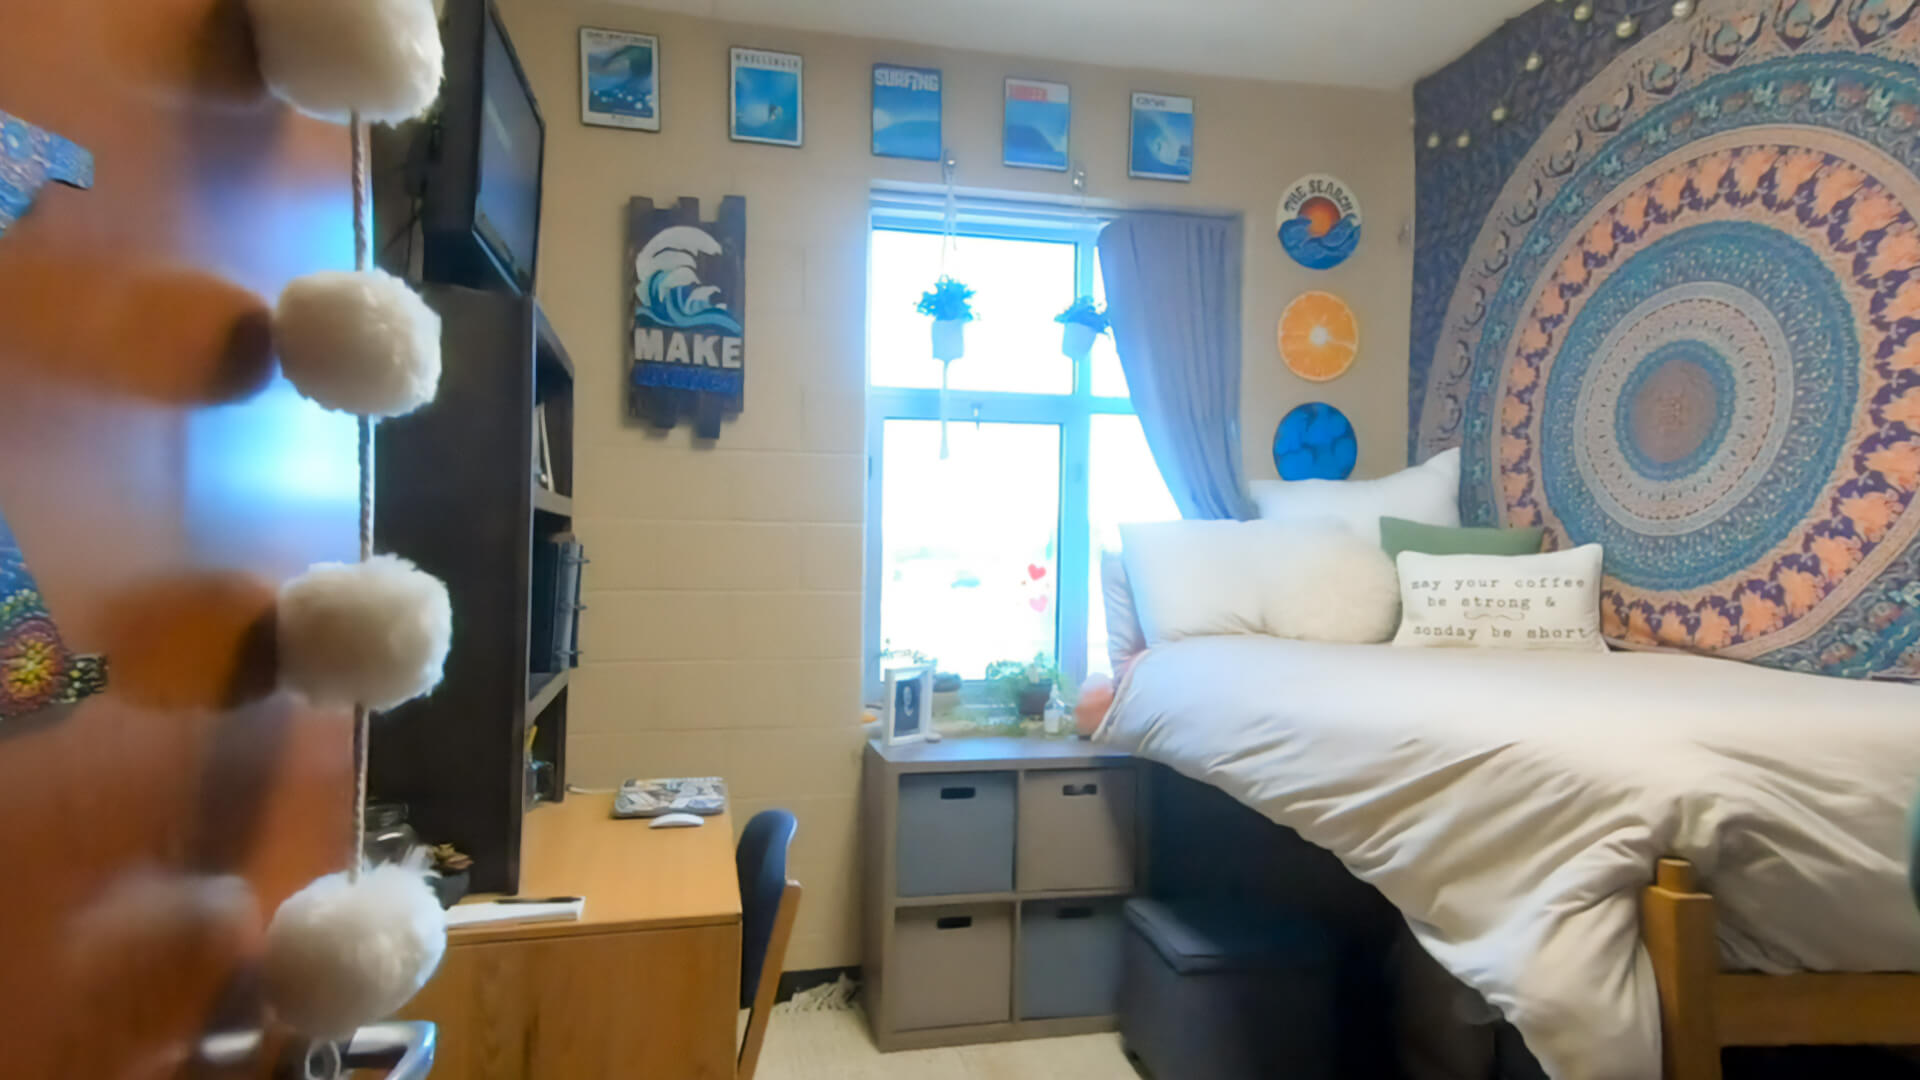 A student’s room in one of the Coburg suites.